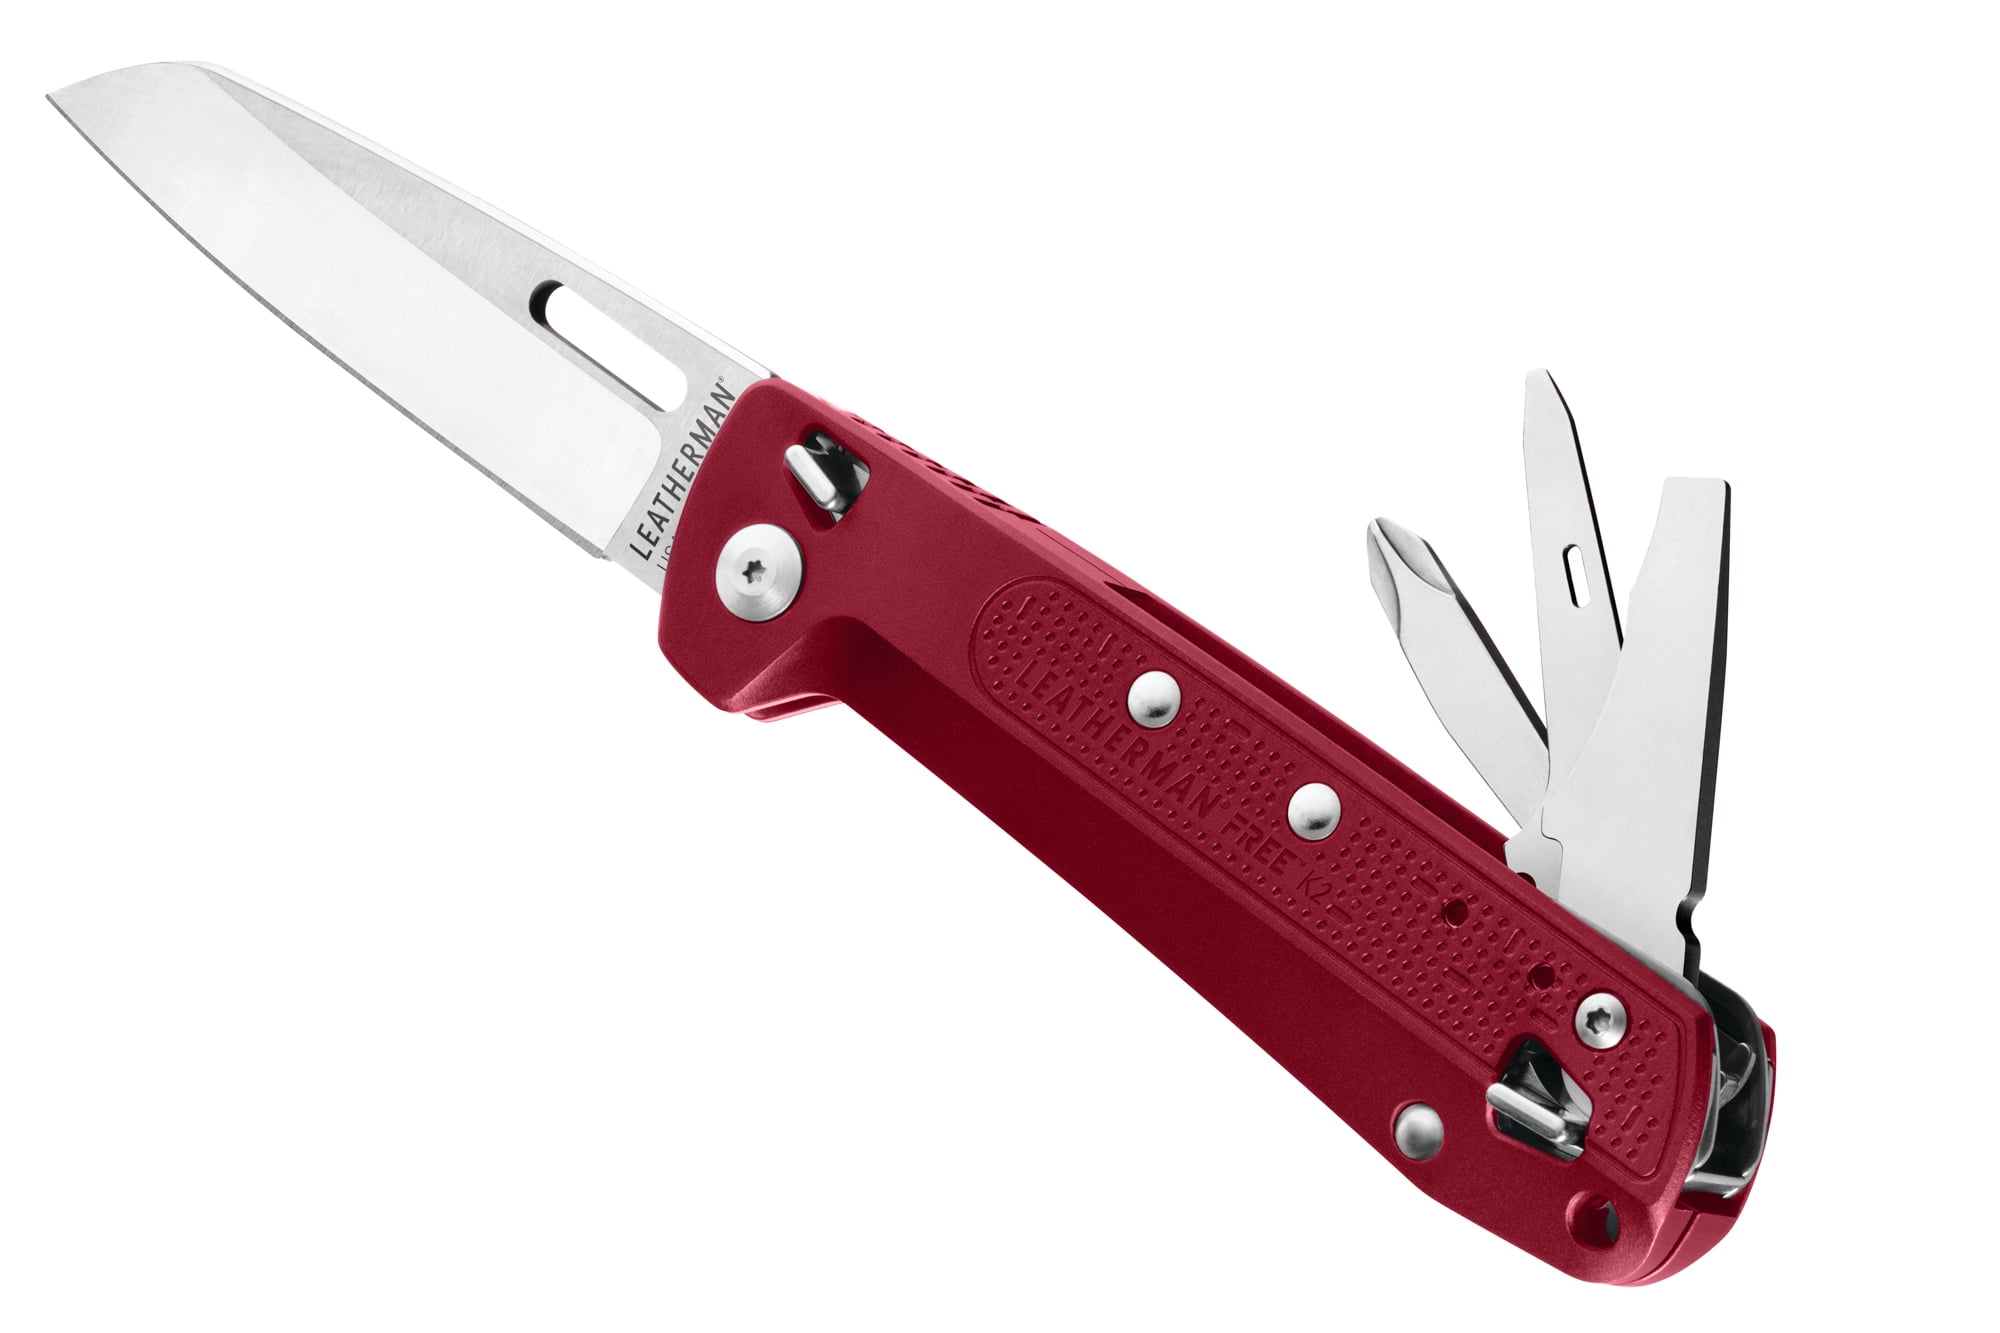 Details about   LEATHERMAN Free K2X Multi-Tool and EDC Pocket Knife Aluminum Body Silver 